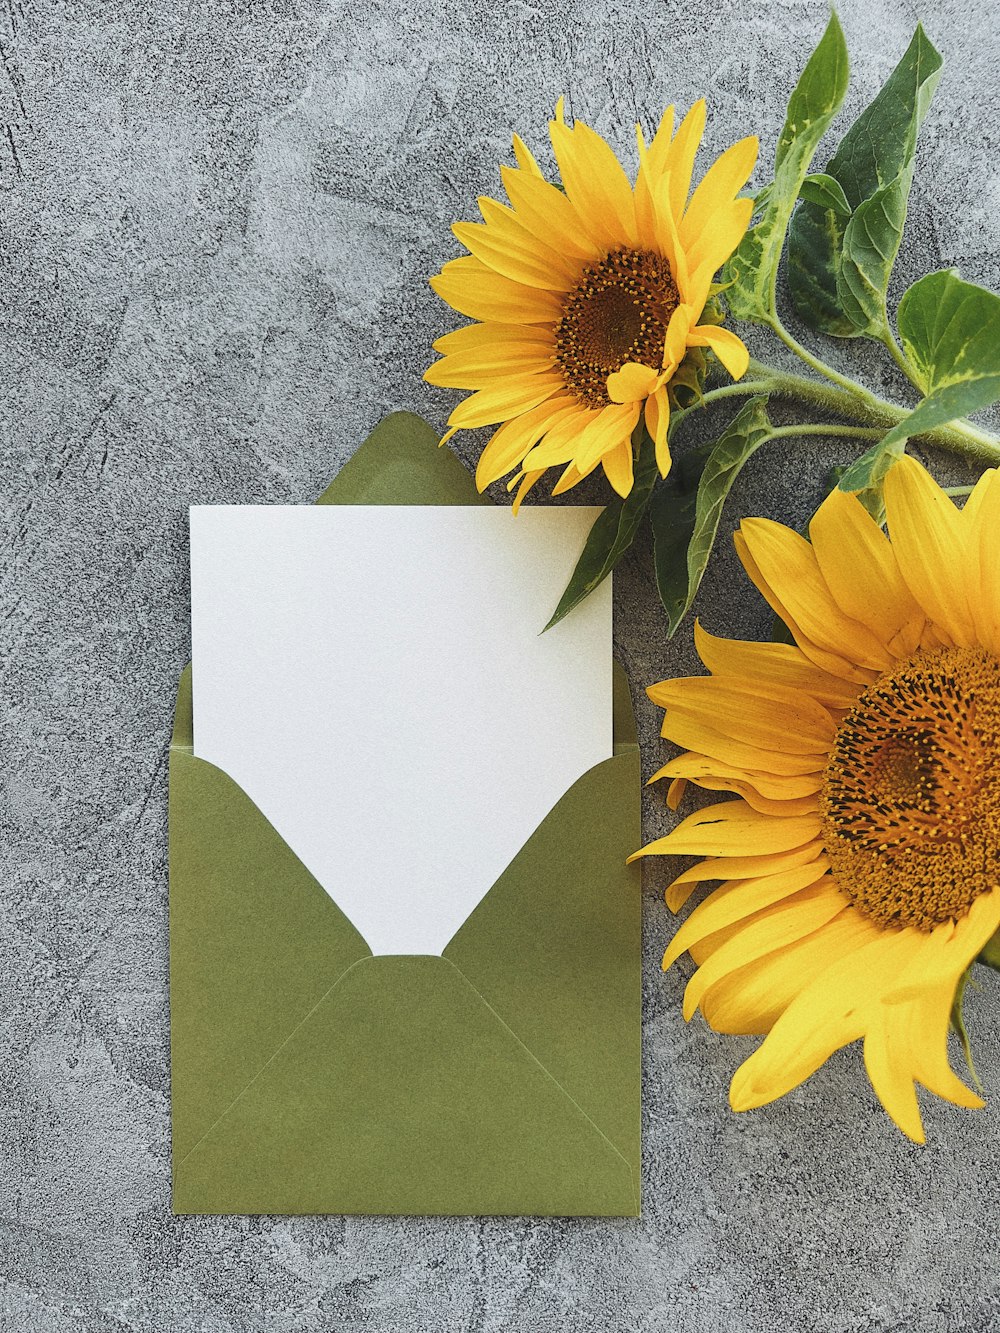 a sunflower next to a green envelope with a white card